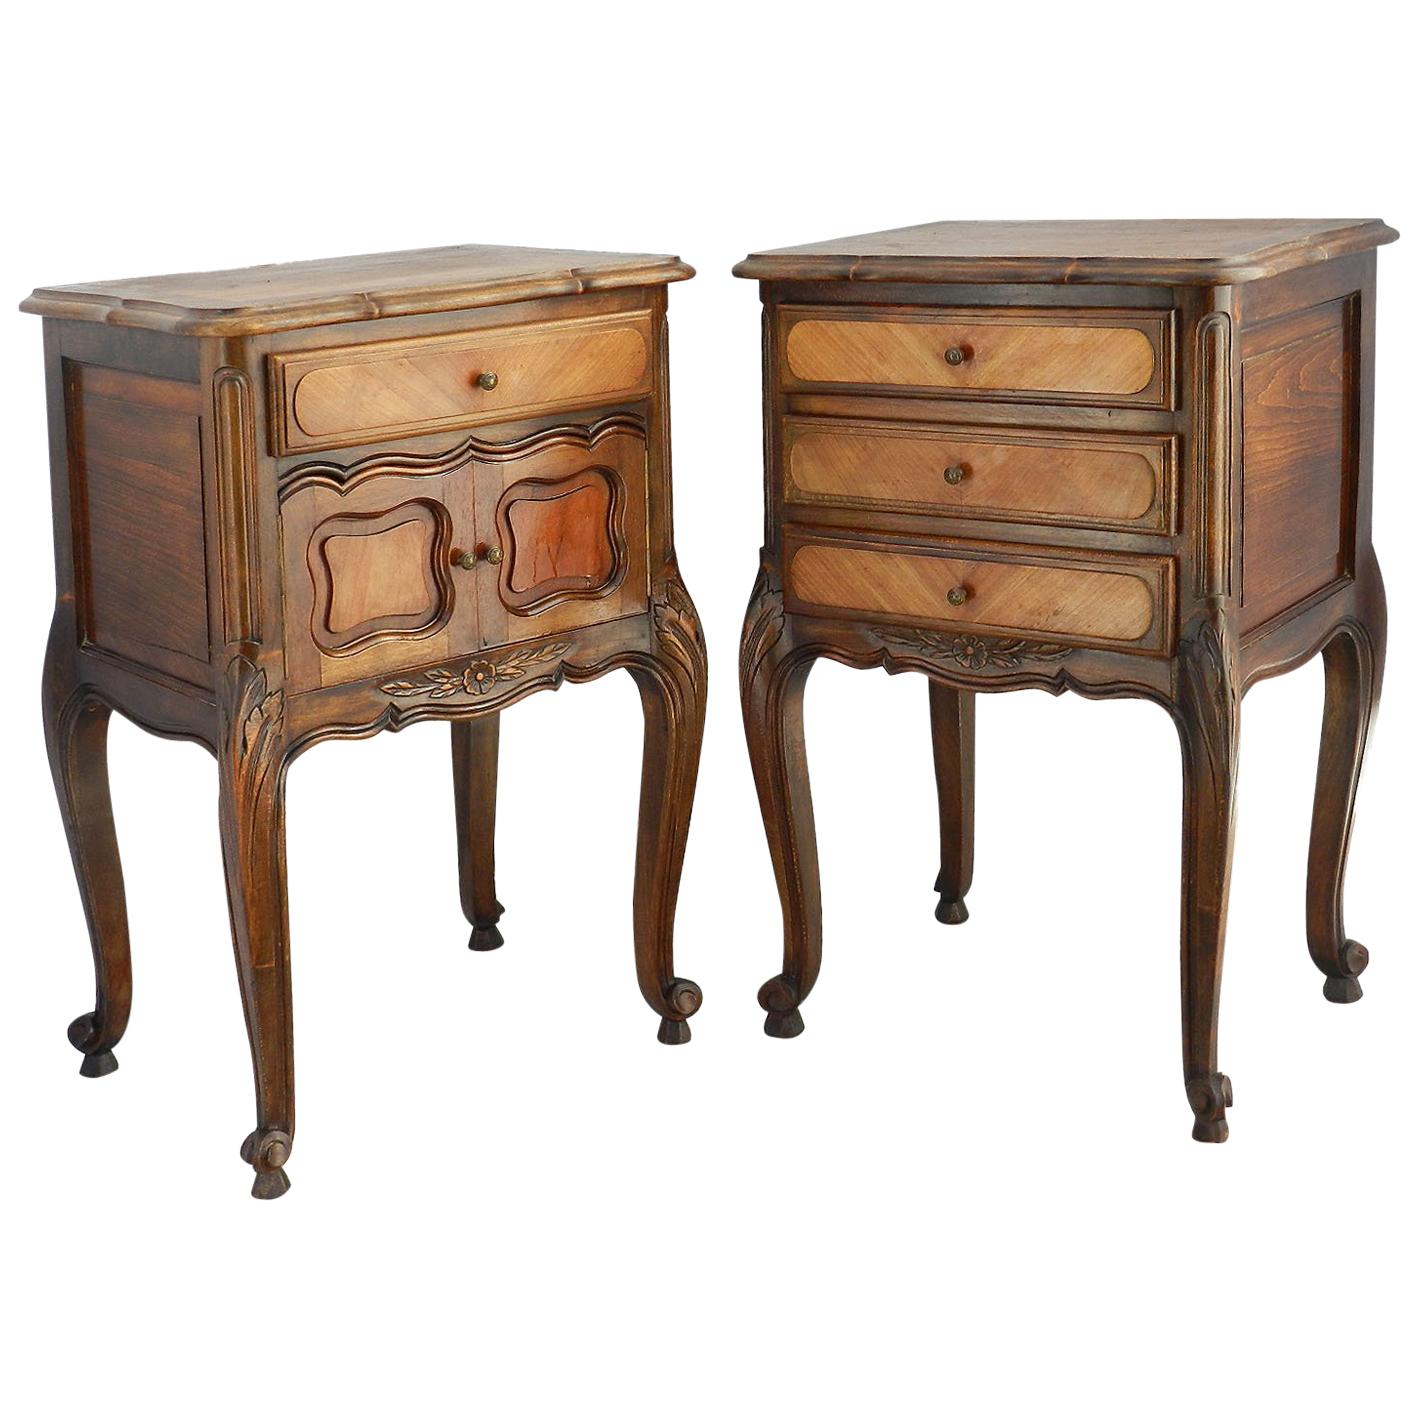 Pair of Nightstands Side Cabinets French Bedside Tables, Early 20th Century